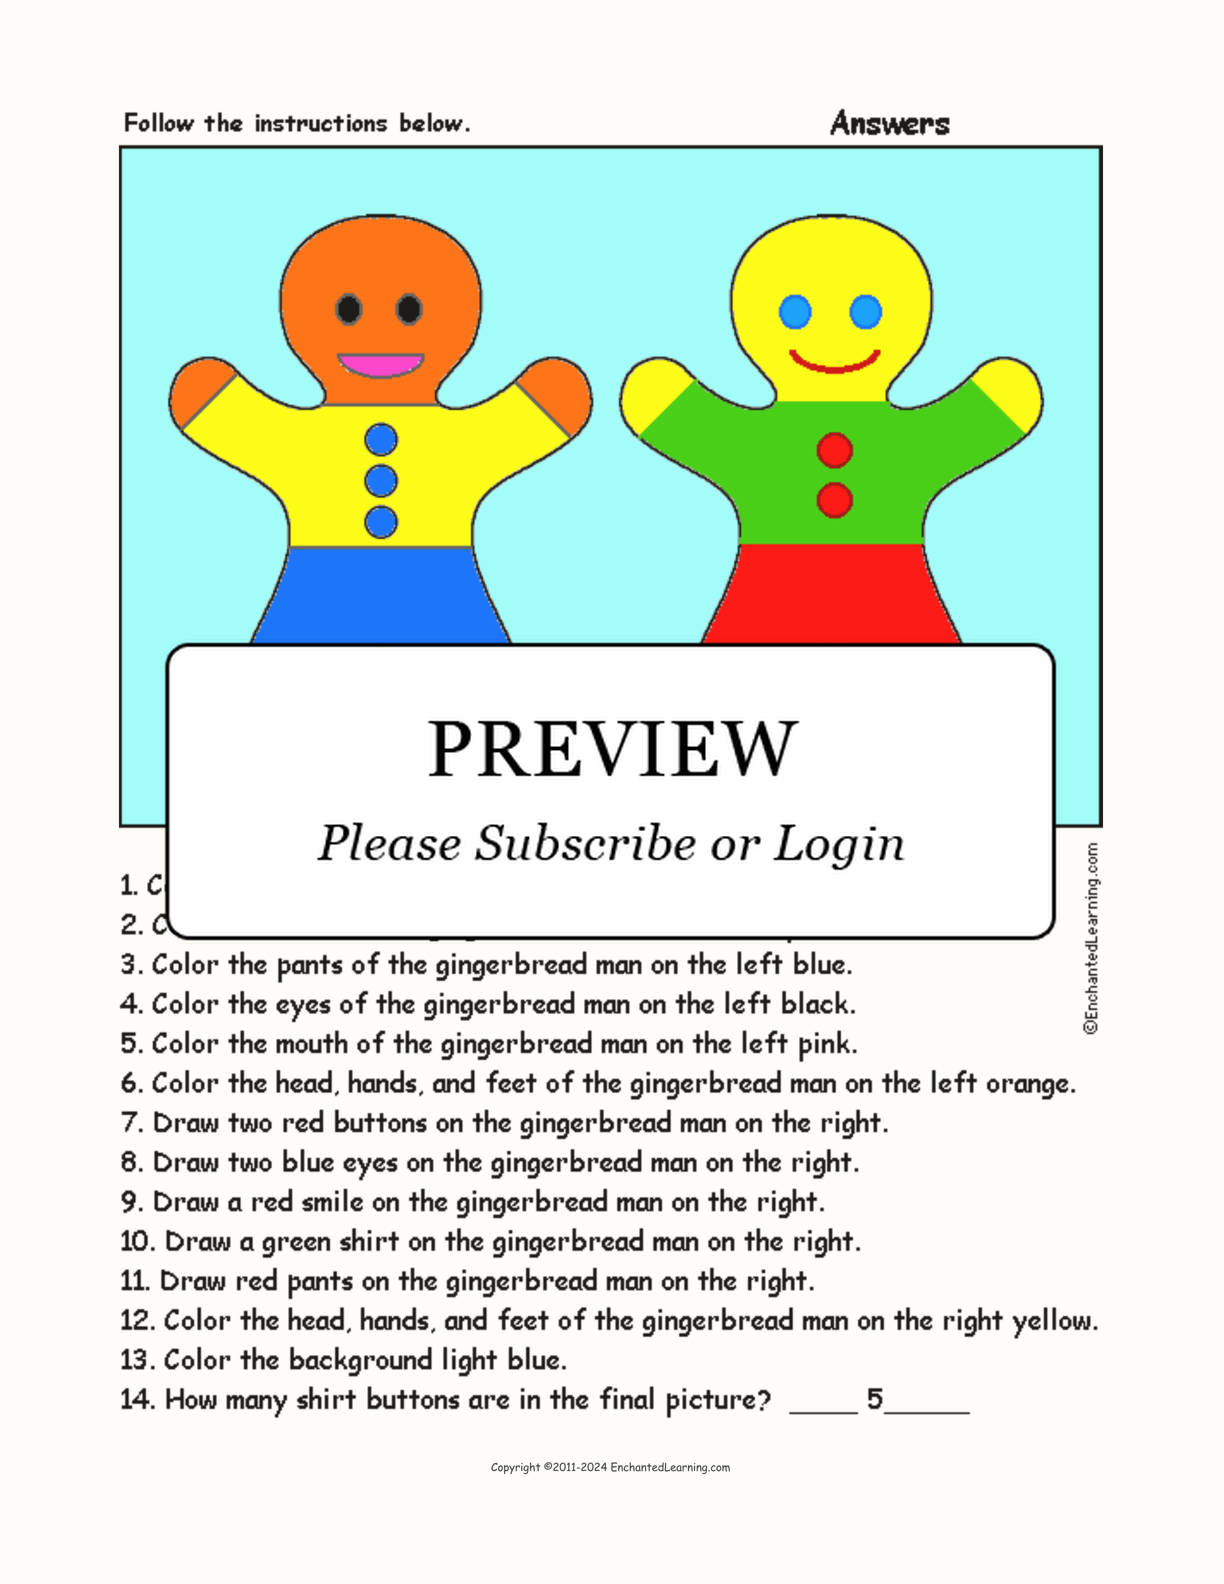 Gingerbread Men - Follow the Instructions interactive worksheet page 2